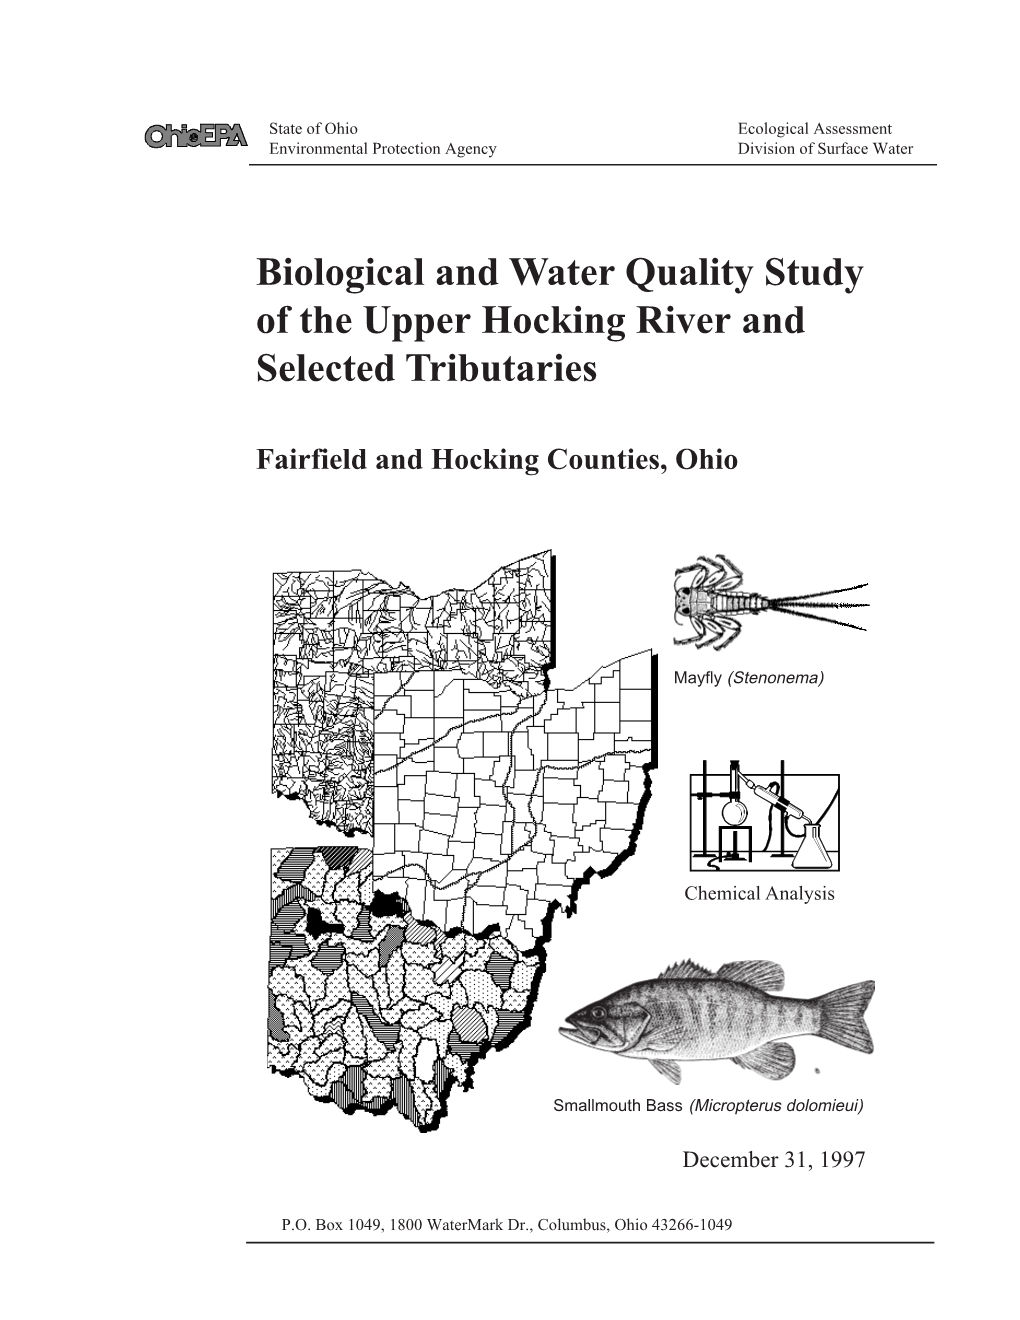 Biological and Water Quality Study of the Upper Hocking River and Selected Tributaries